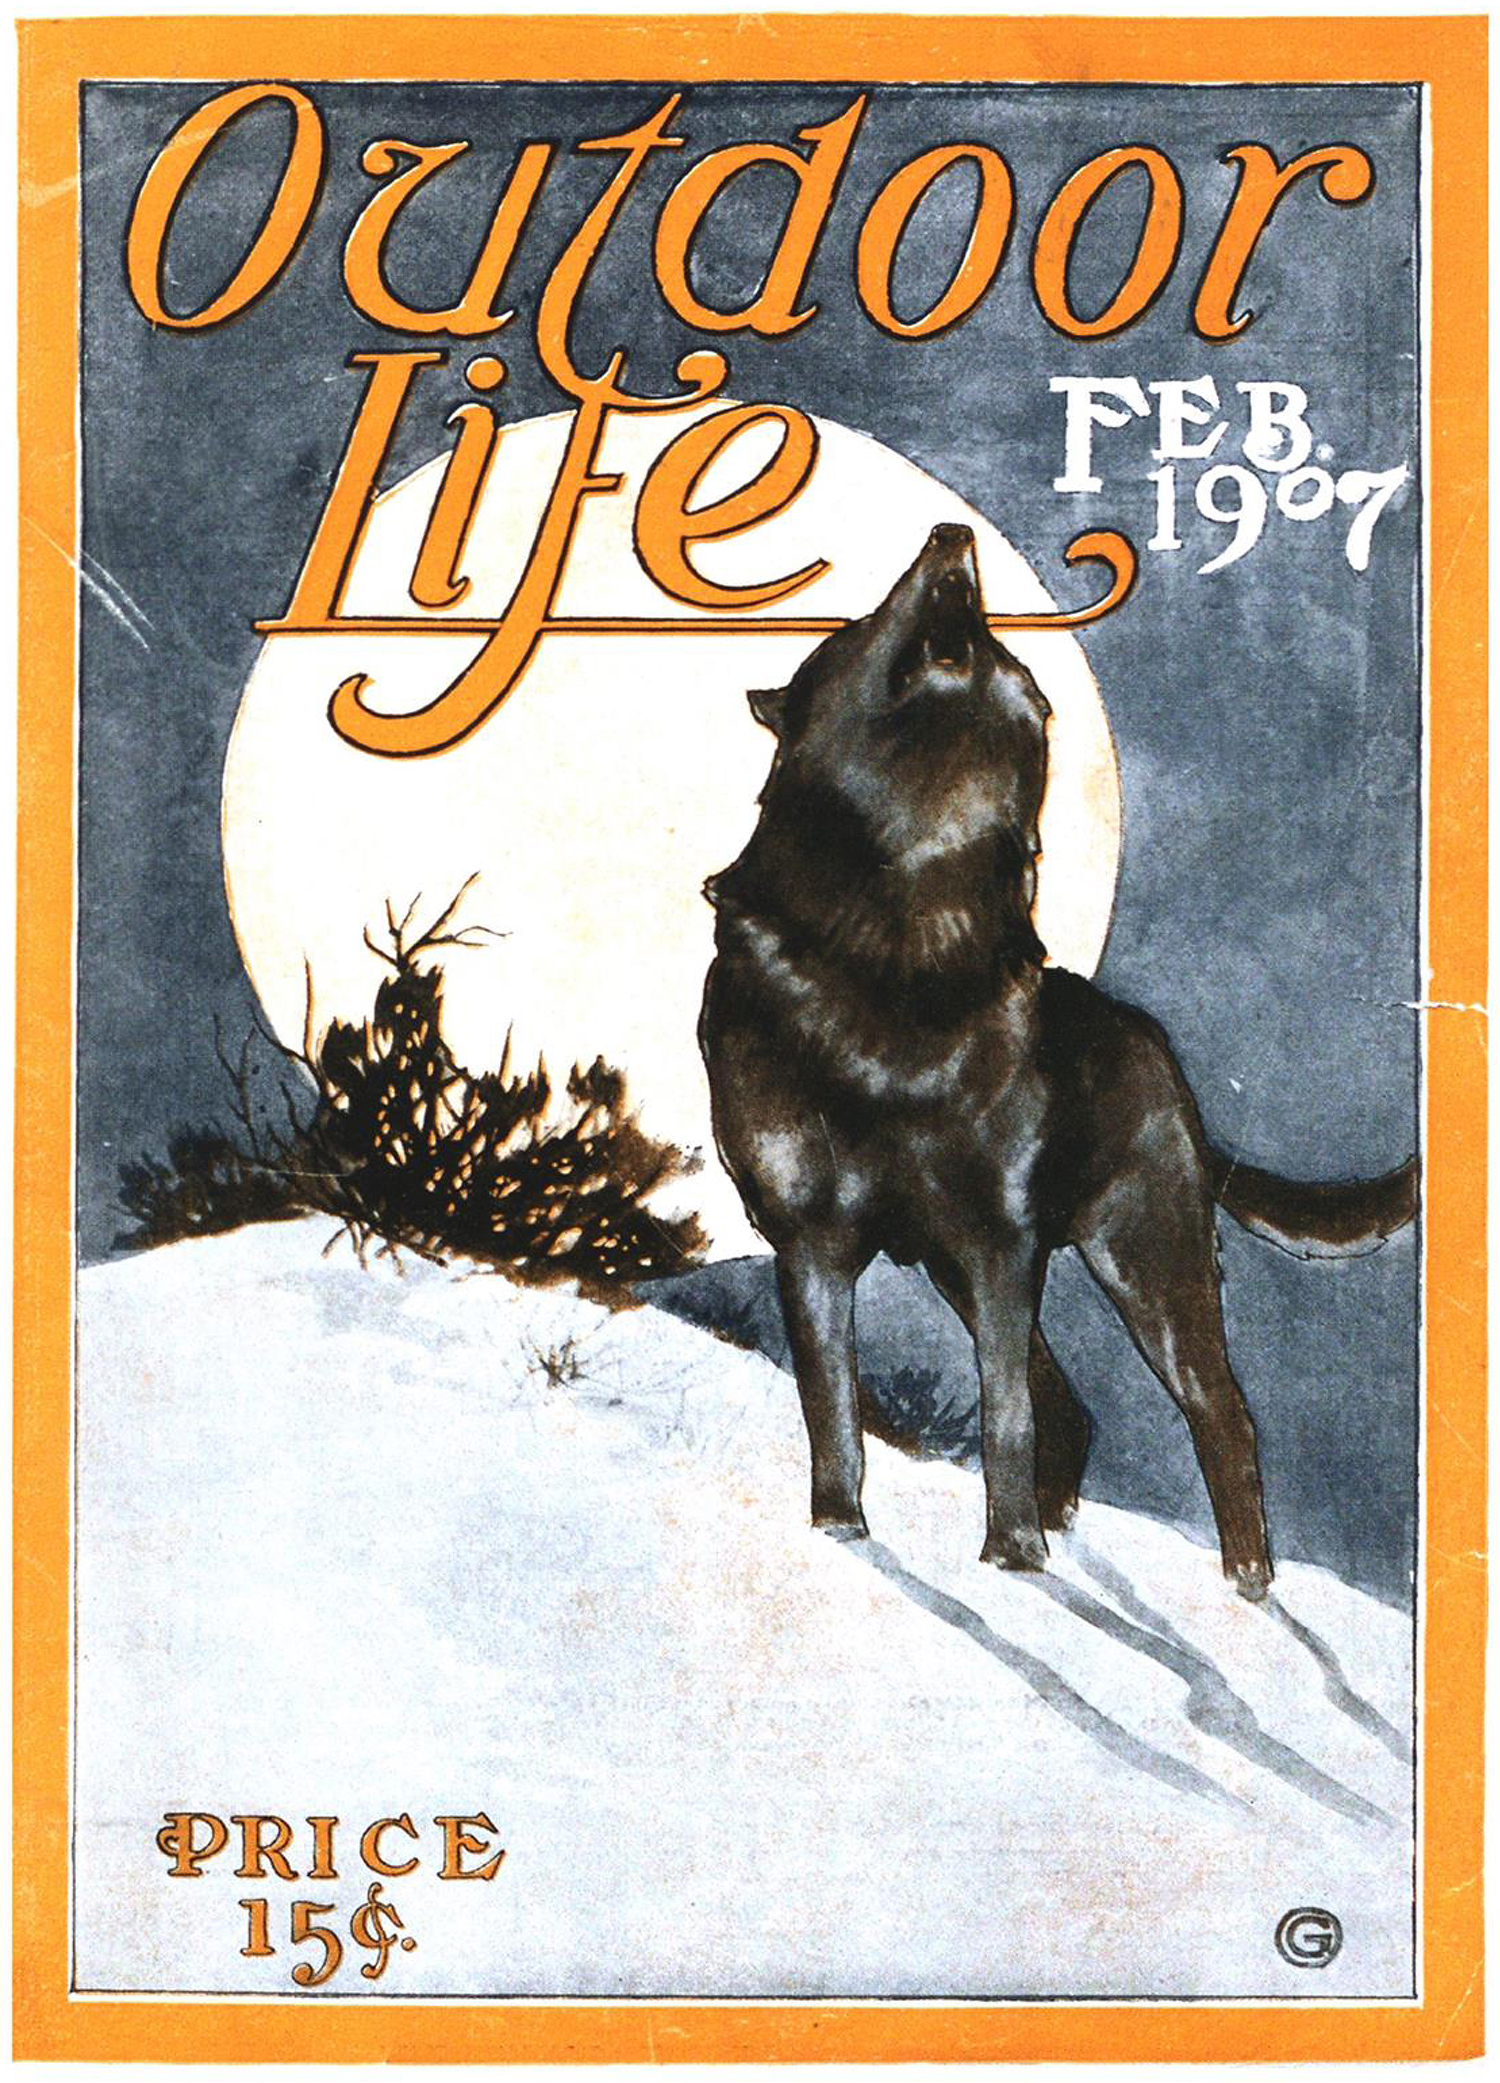 ­February 1907: The covers from this decade were often simple yet striking, like this one depicting a howling wolf.